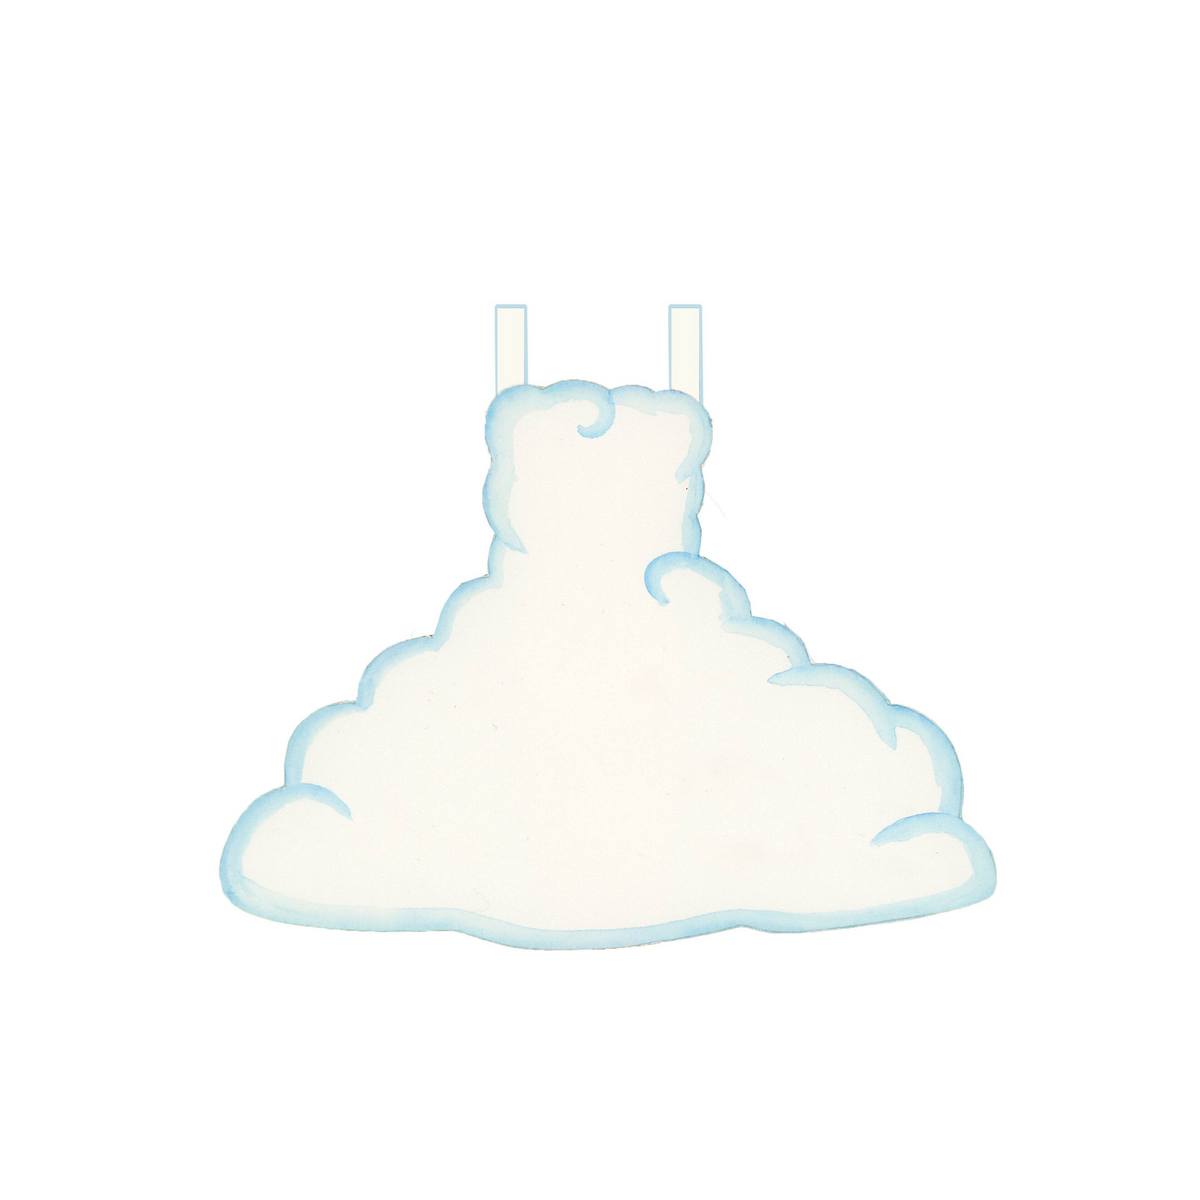 "Among the Clouds" SUNSET CLOUD Costume